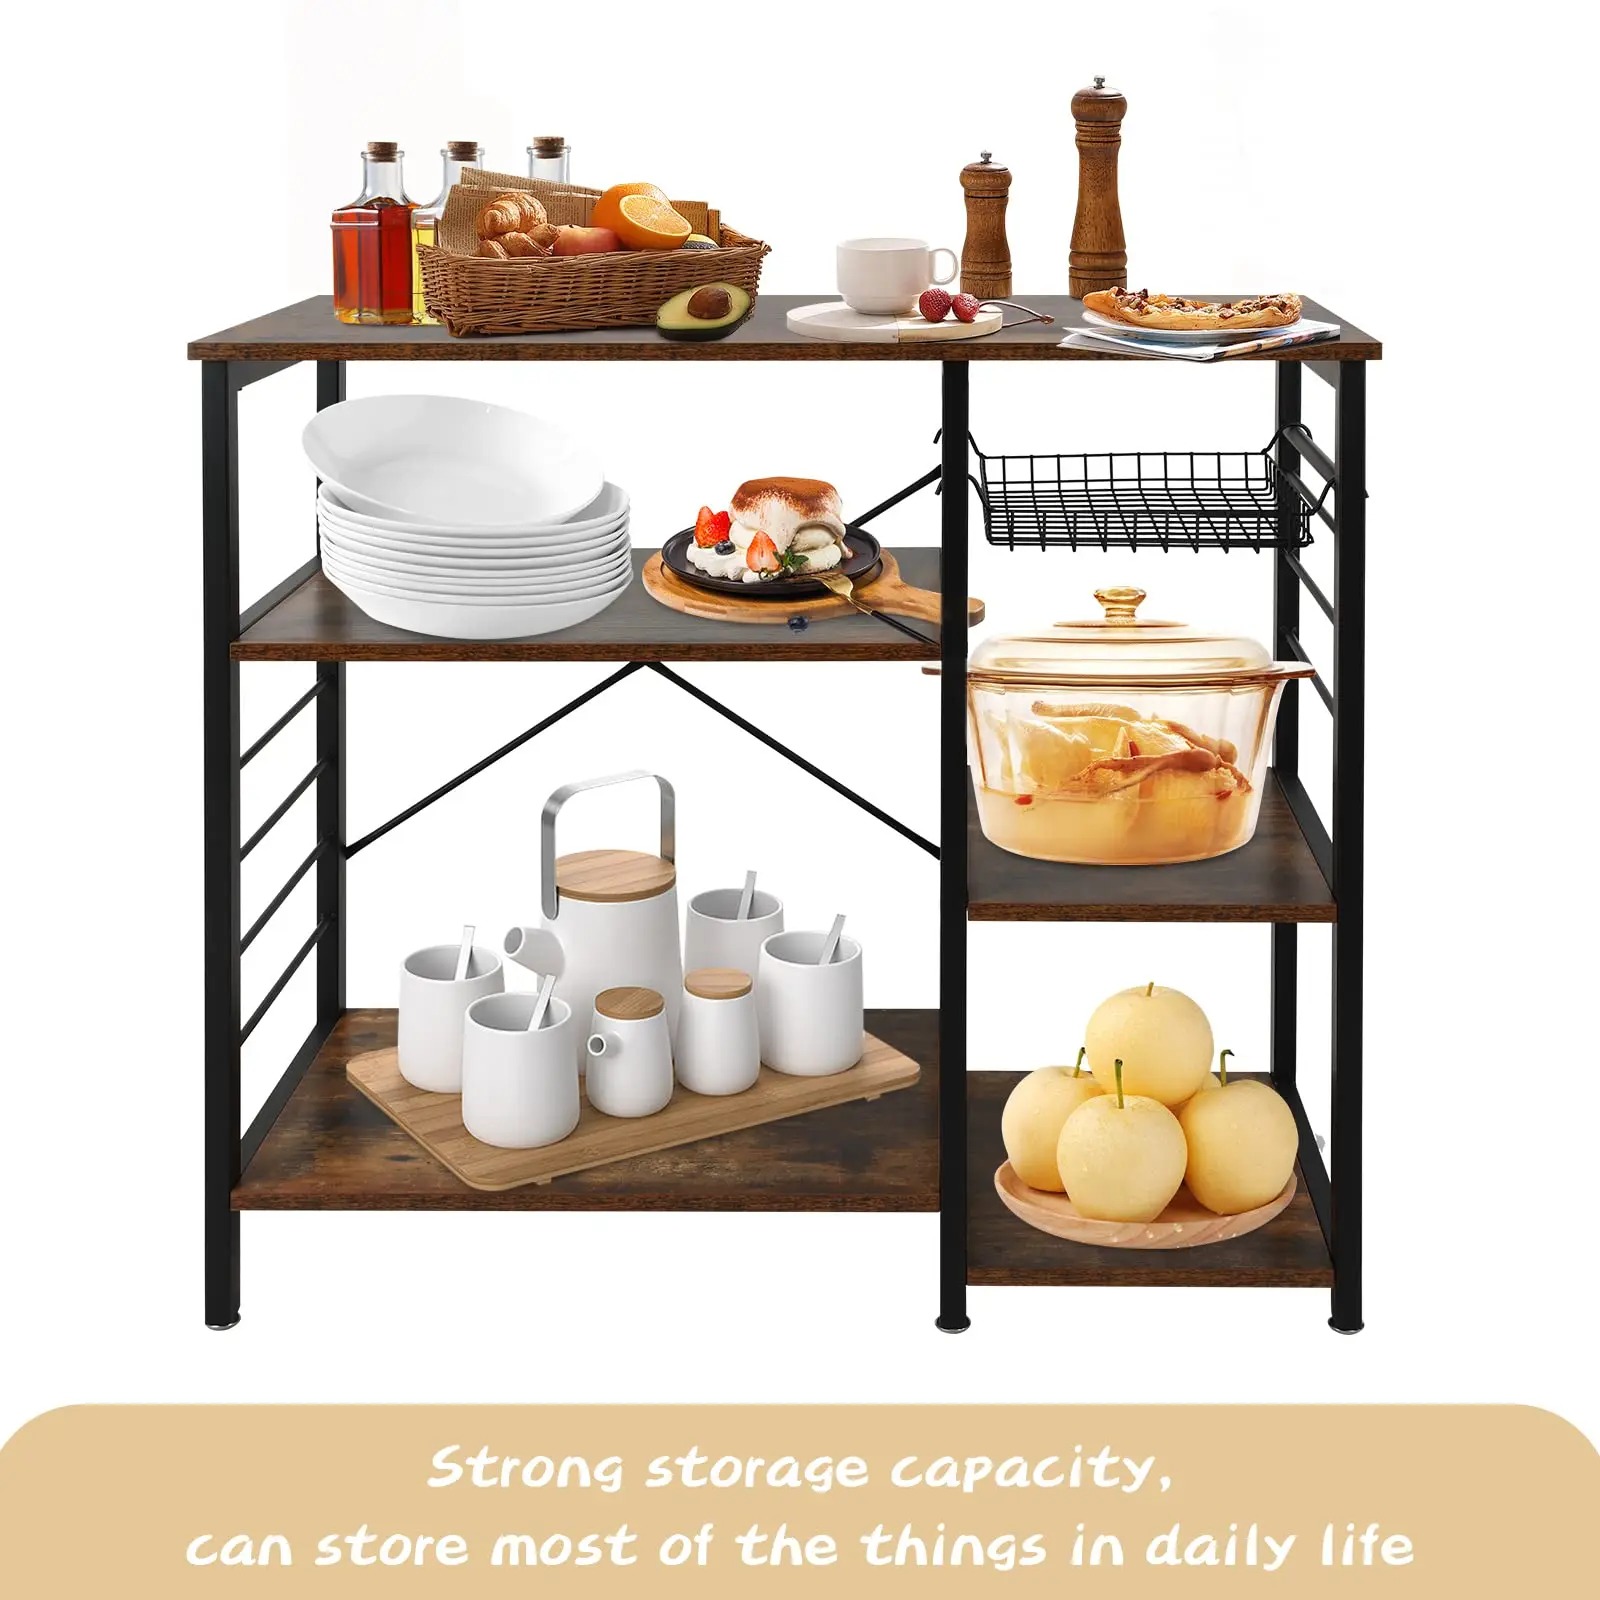 Hot Sales Kitchen Storage Home Coffee Bar Microwave Shelf Kitchen Bakers Rack Microwave Stand Bakers Storage Racks For Kitchens